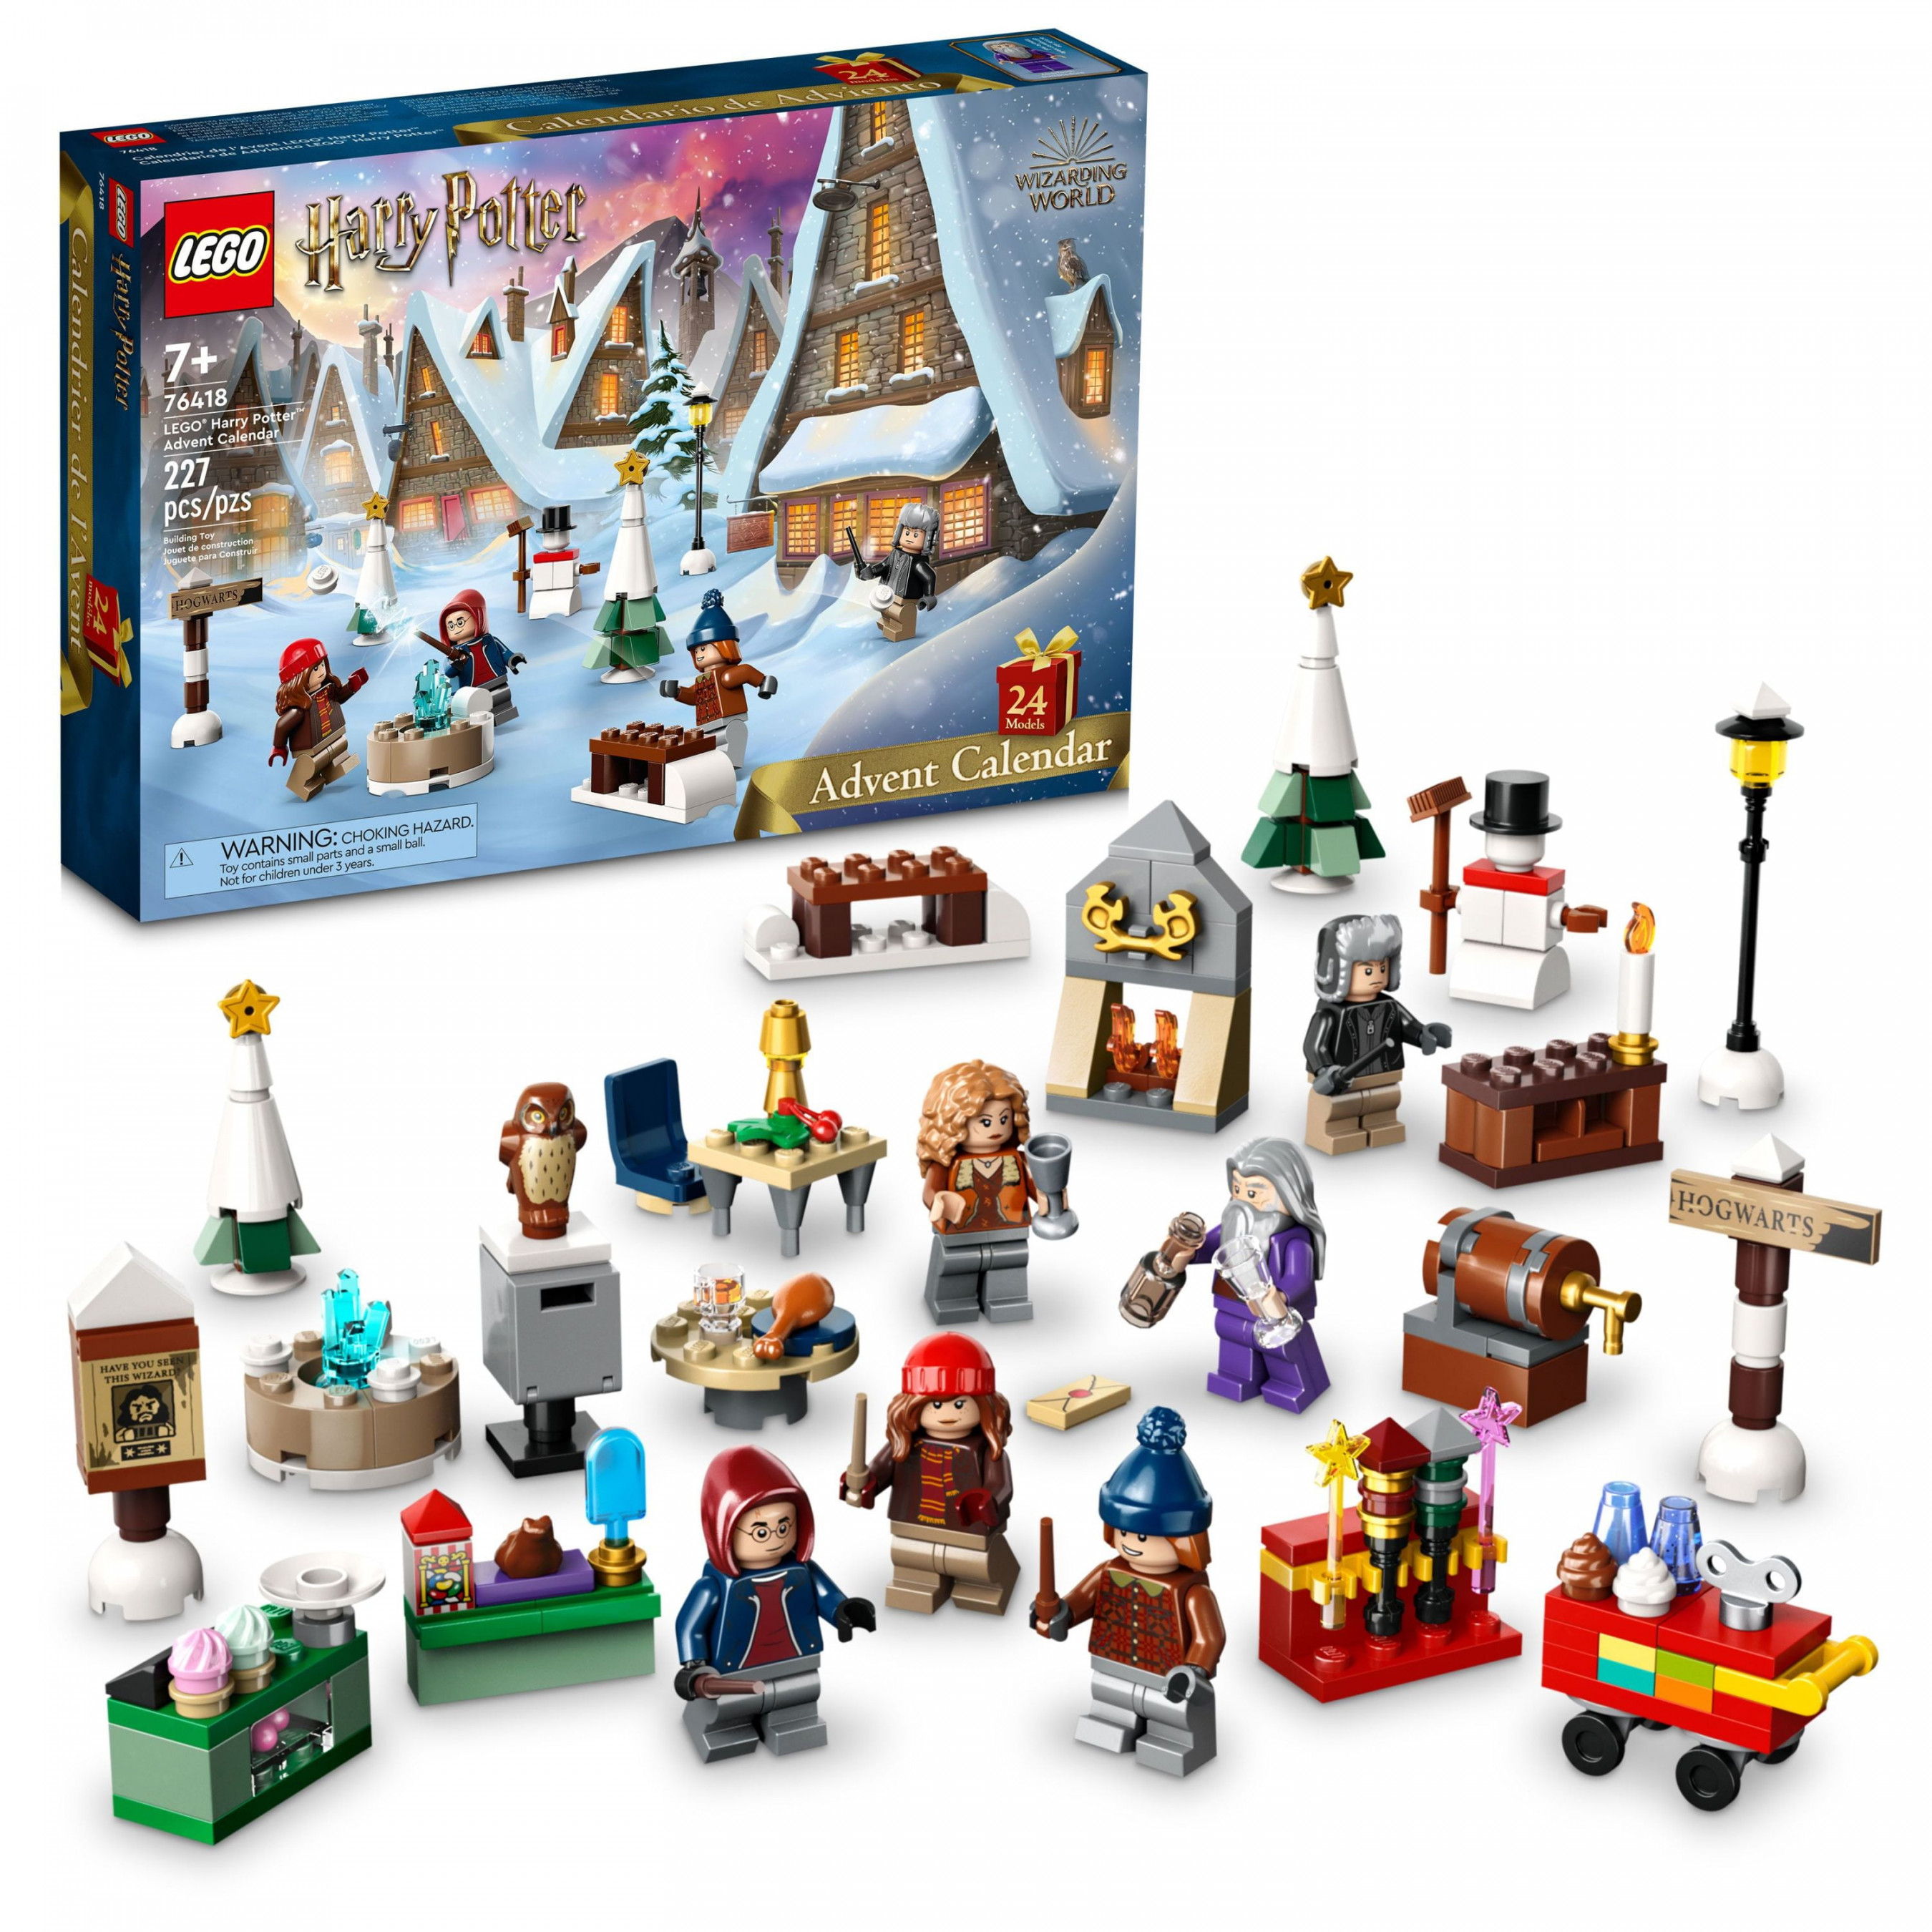 LEGO Harry Potter  Advent Calendar  Christmas Countdown Playset  with Daily Suprises, Discover New Experiences with this Holiday Gift